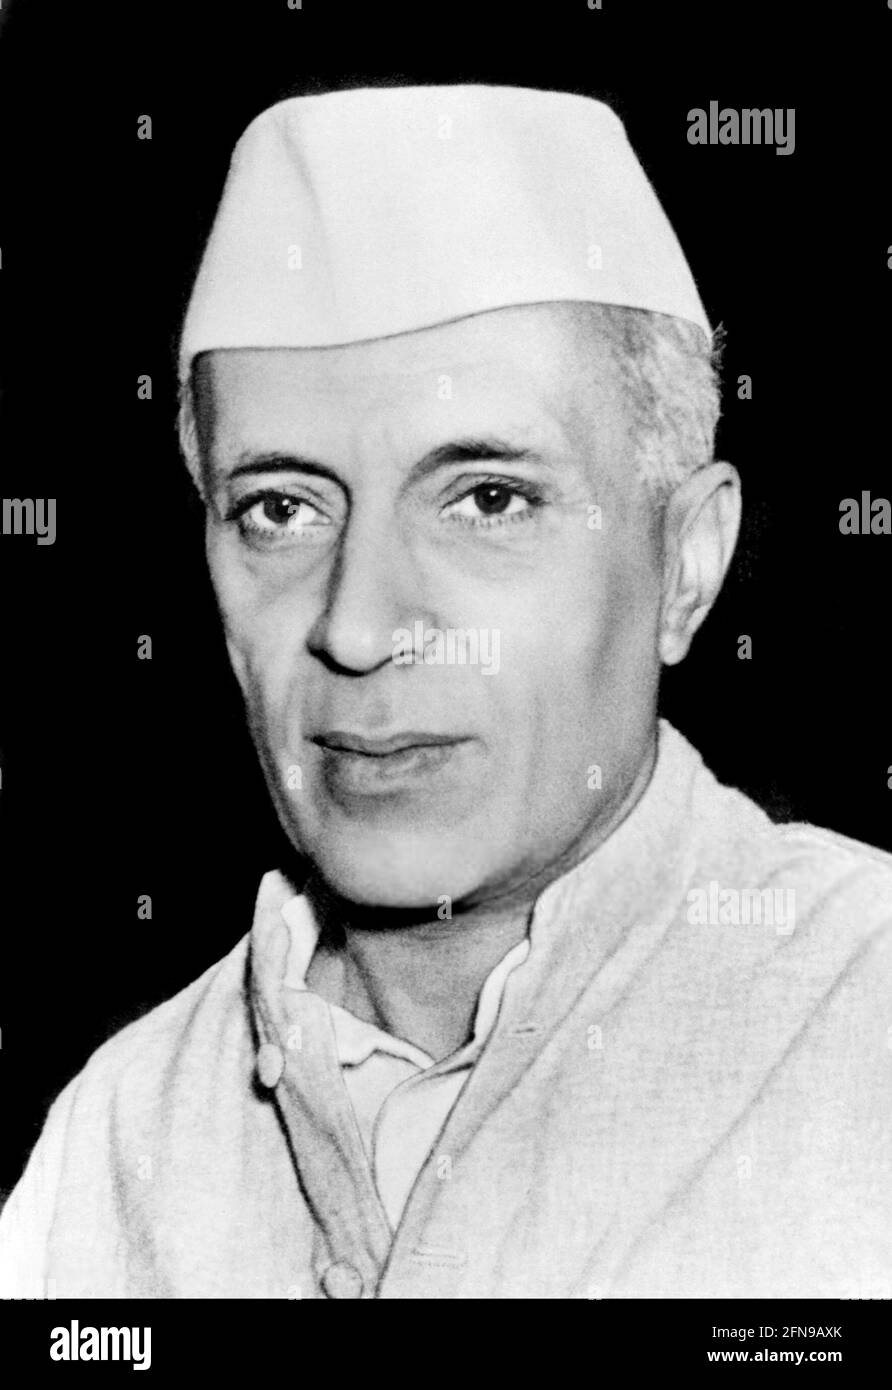 Jawaharlal Nehru. Portrait of the first prime minister of India, Jawaharlal Nehru (1889-1964) in 1947 Stock Photo